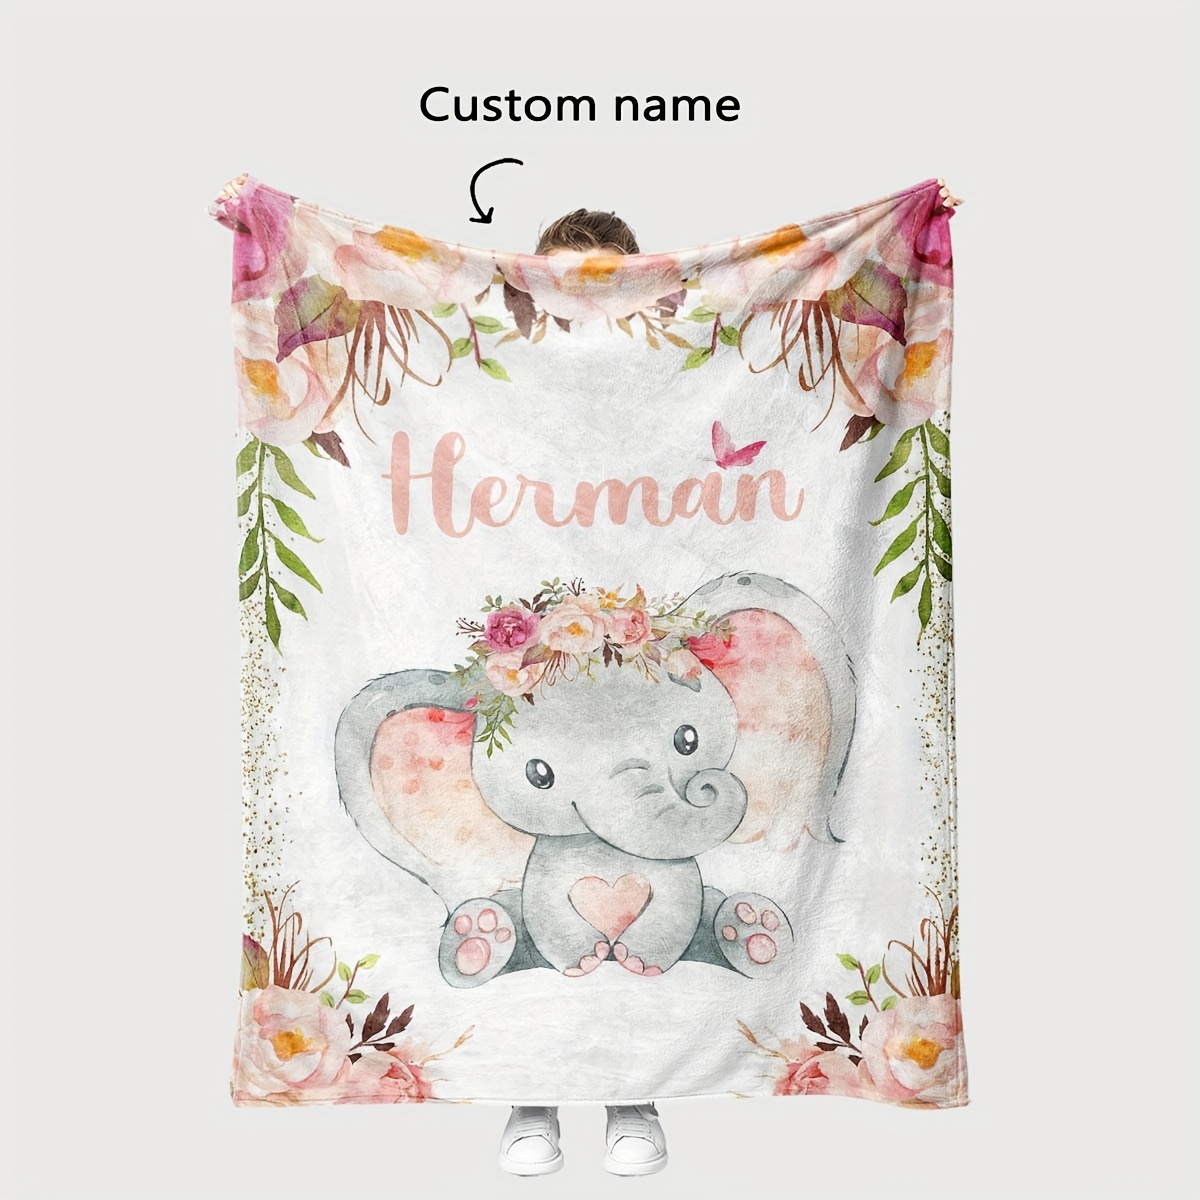 

1pc Digital Print Name Custom Blanket Contemporary Cute Elephant Print Flannel Throw Blanket - All Season Versatile, Easy To Care, Comfortable For Sofa, Bed, Travel